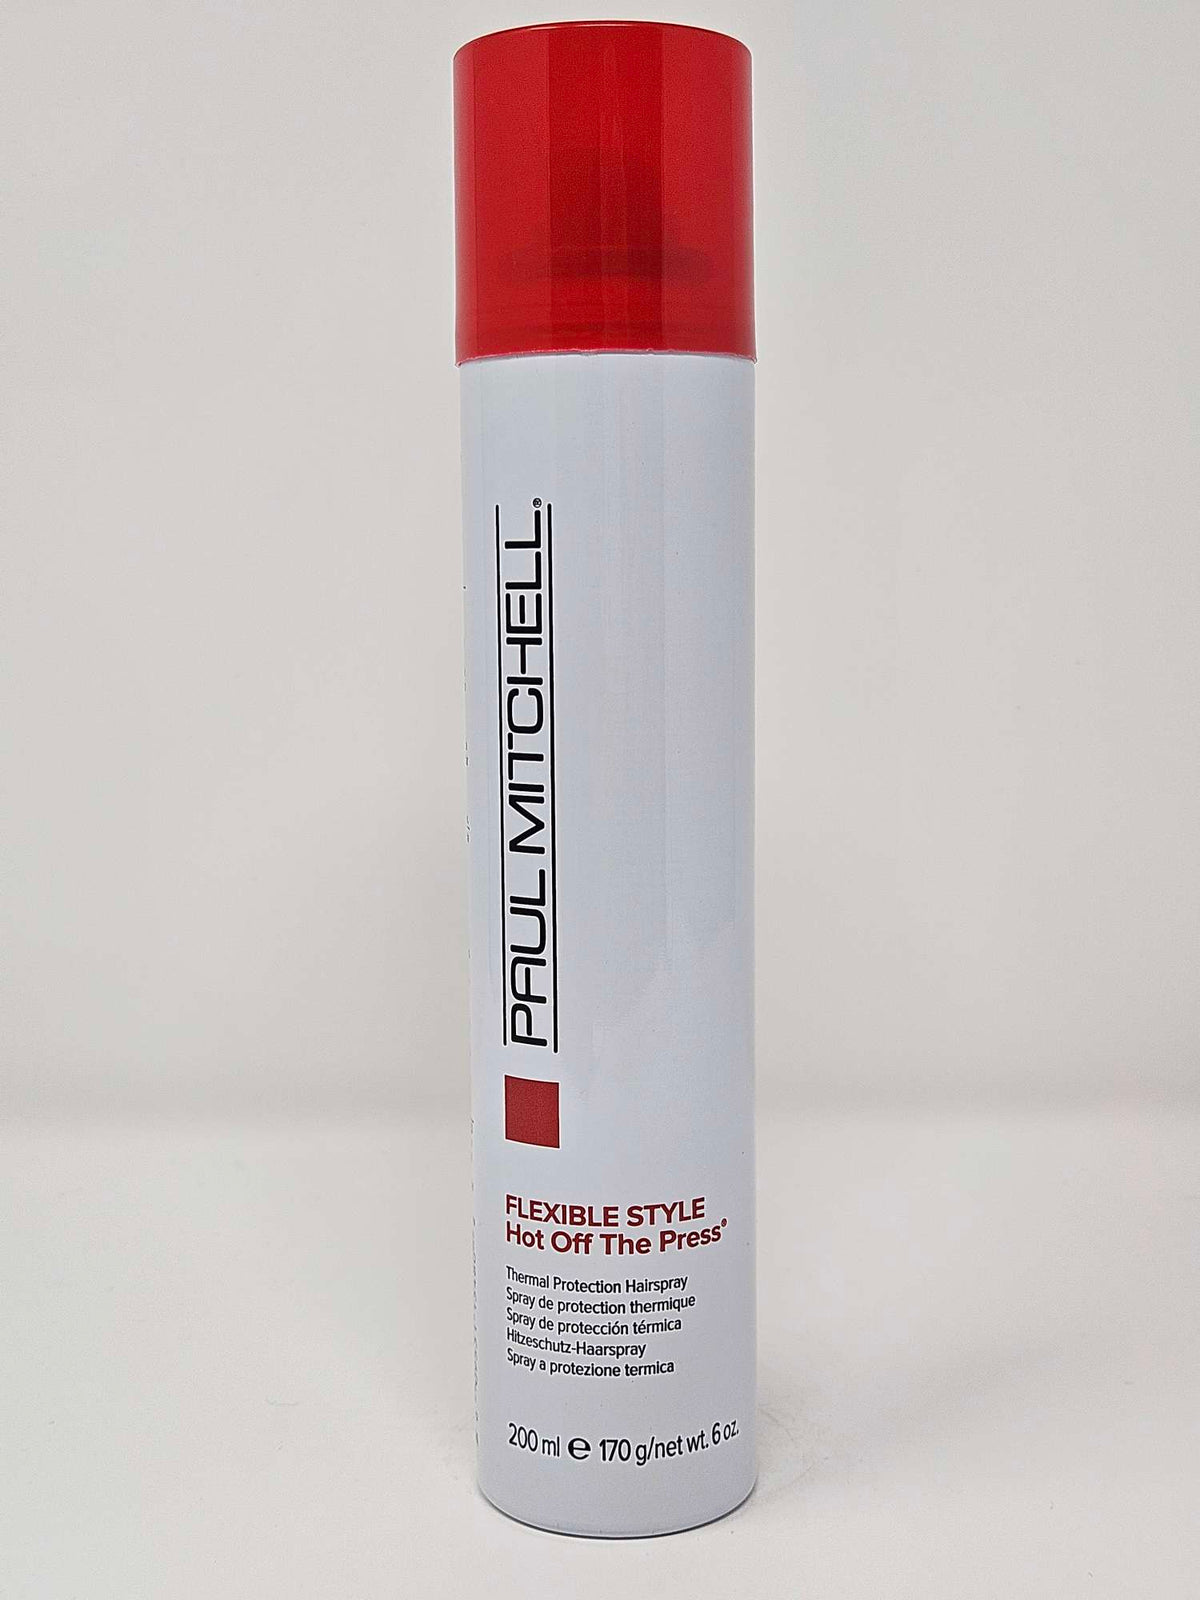 Paul Mitchell Flexible Style Hot Off the Press